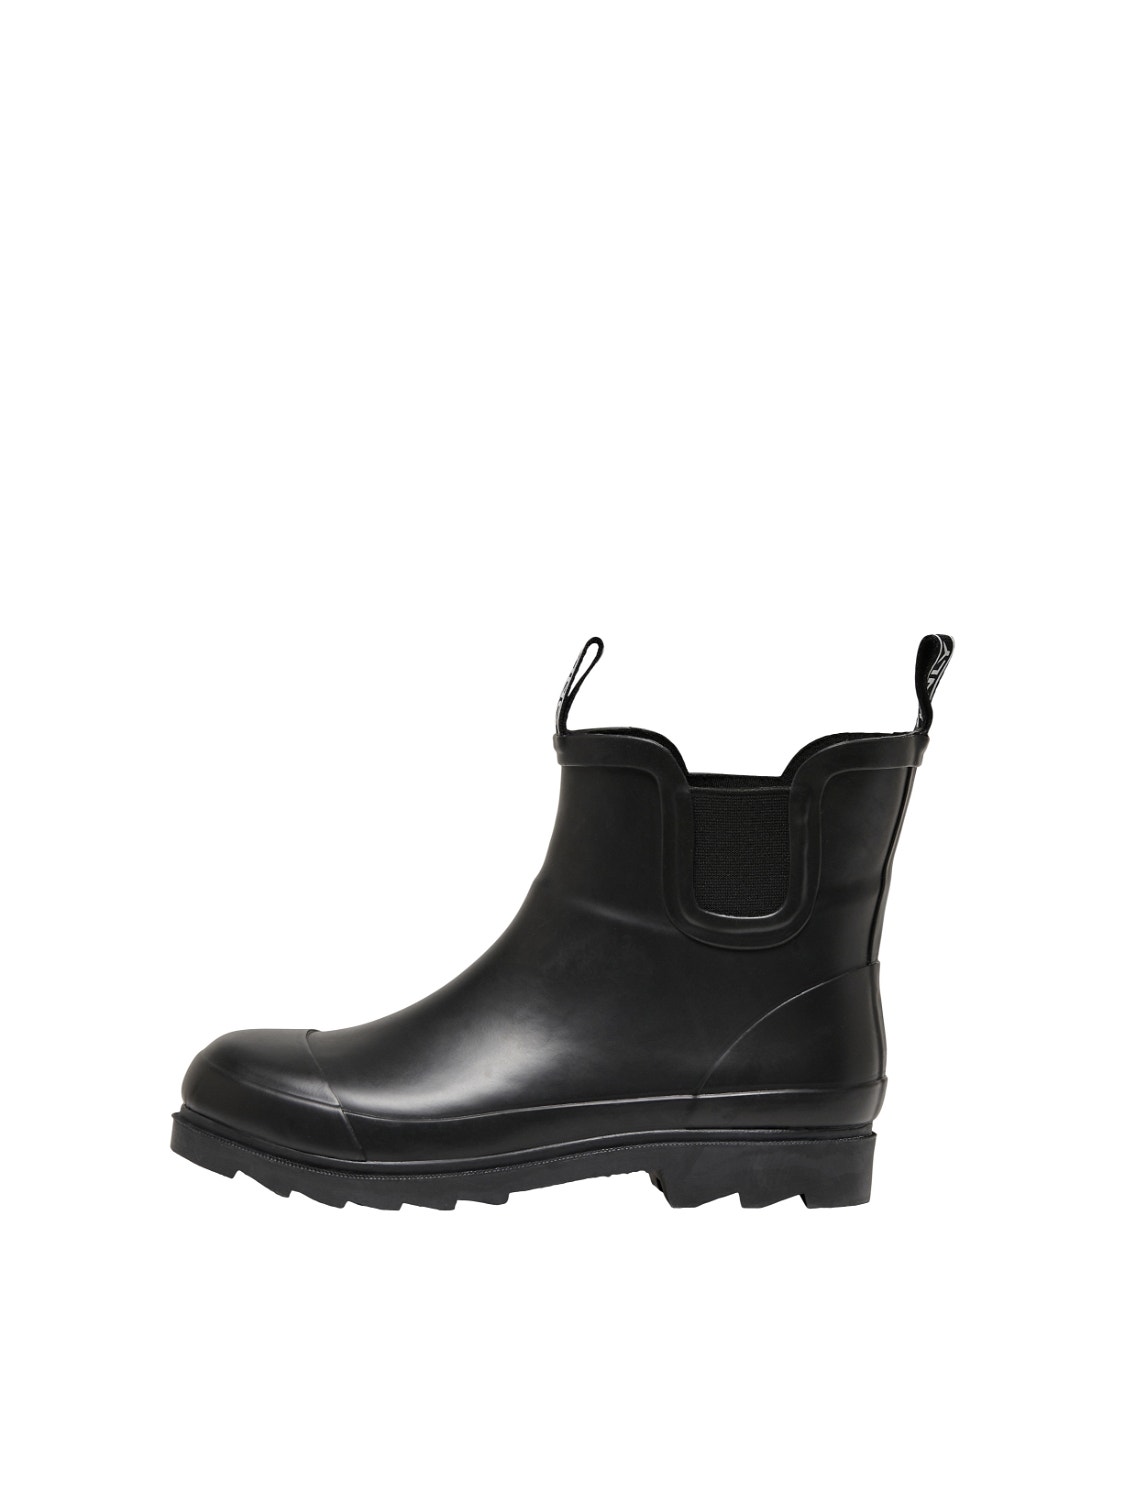 ONLY Boots -Black - 15253234